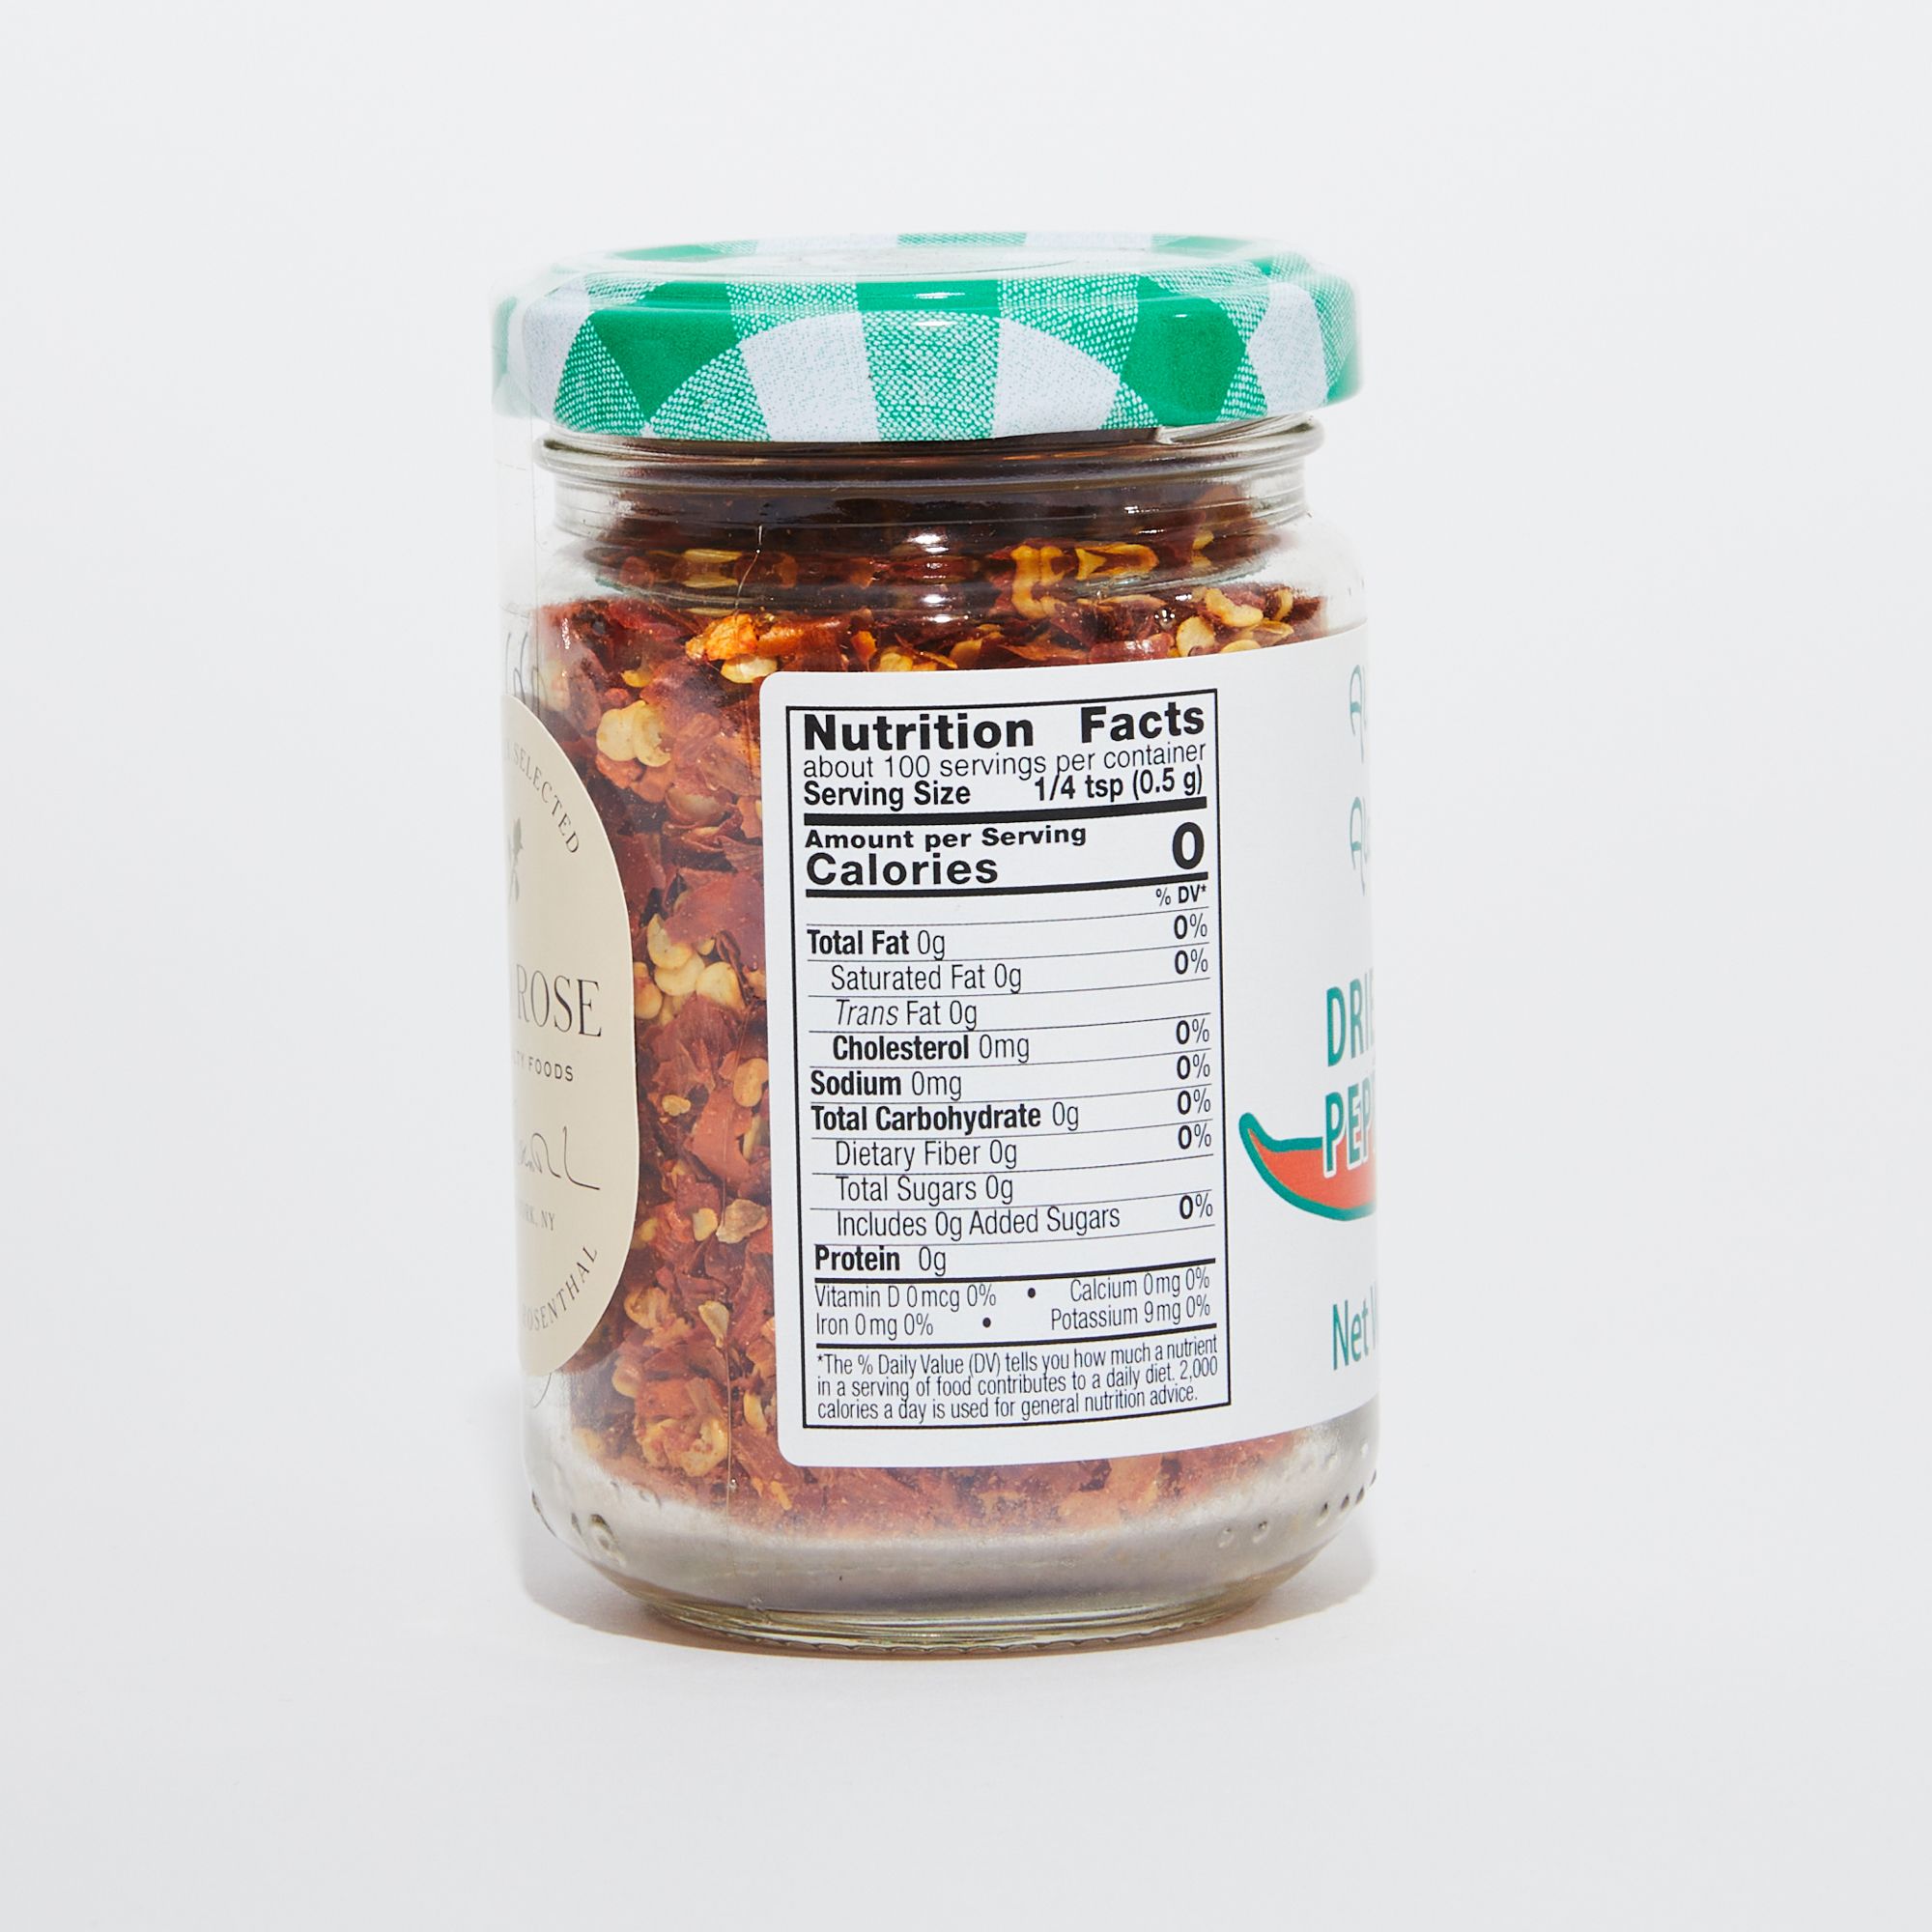 Clear glass jar full of red pepper flakes with a green and white gingham lid and a white label featuring nutritional facts